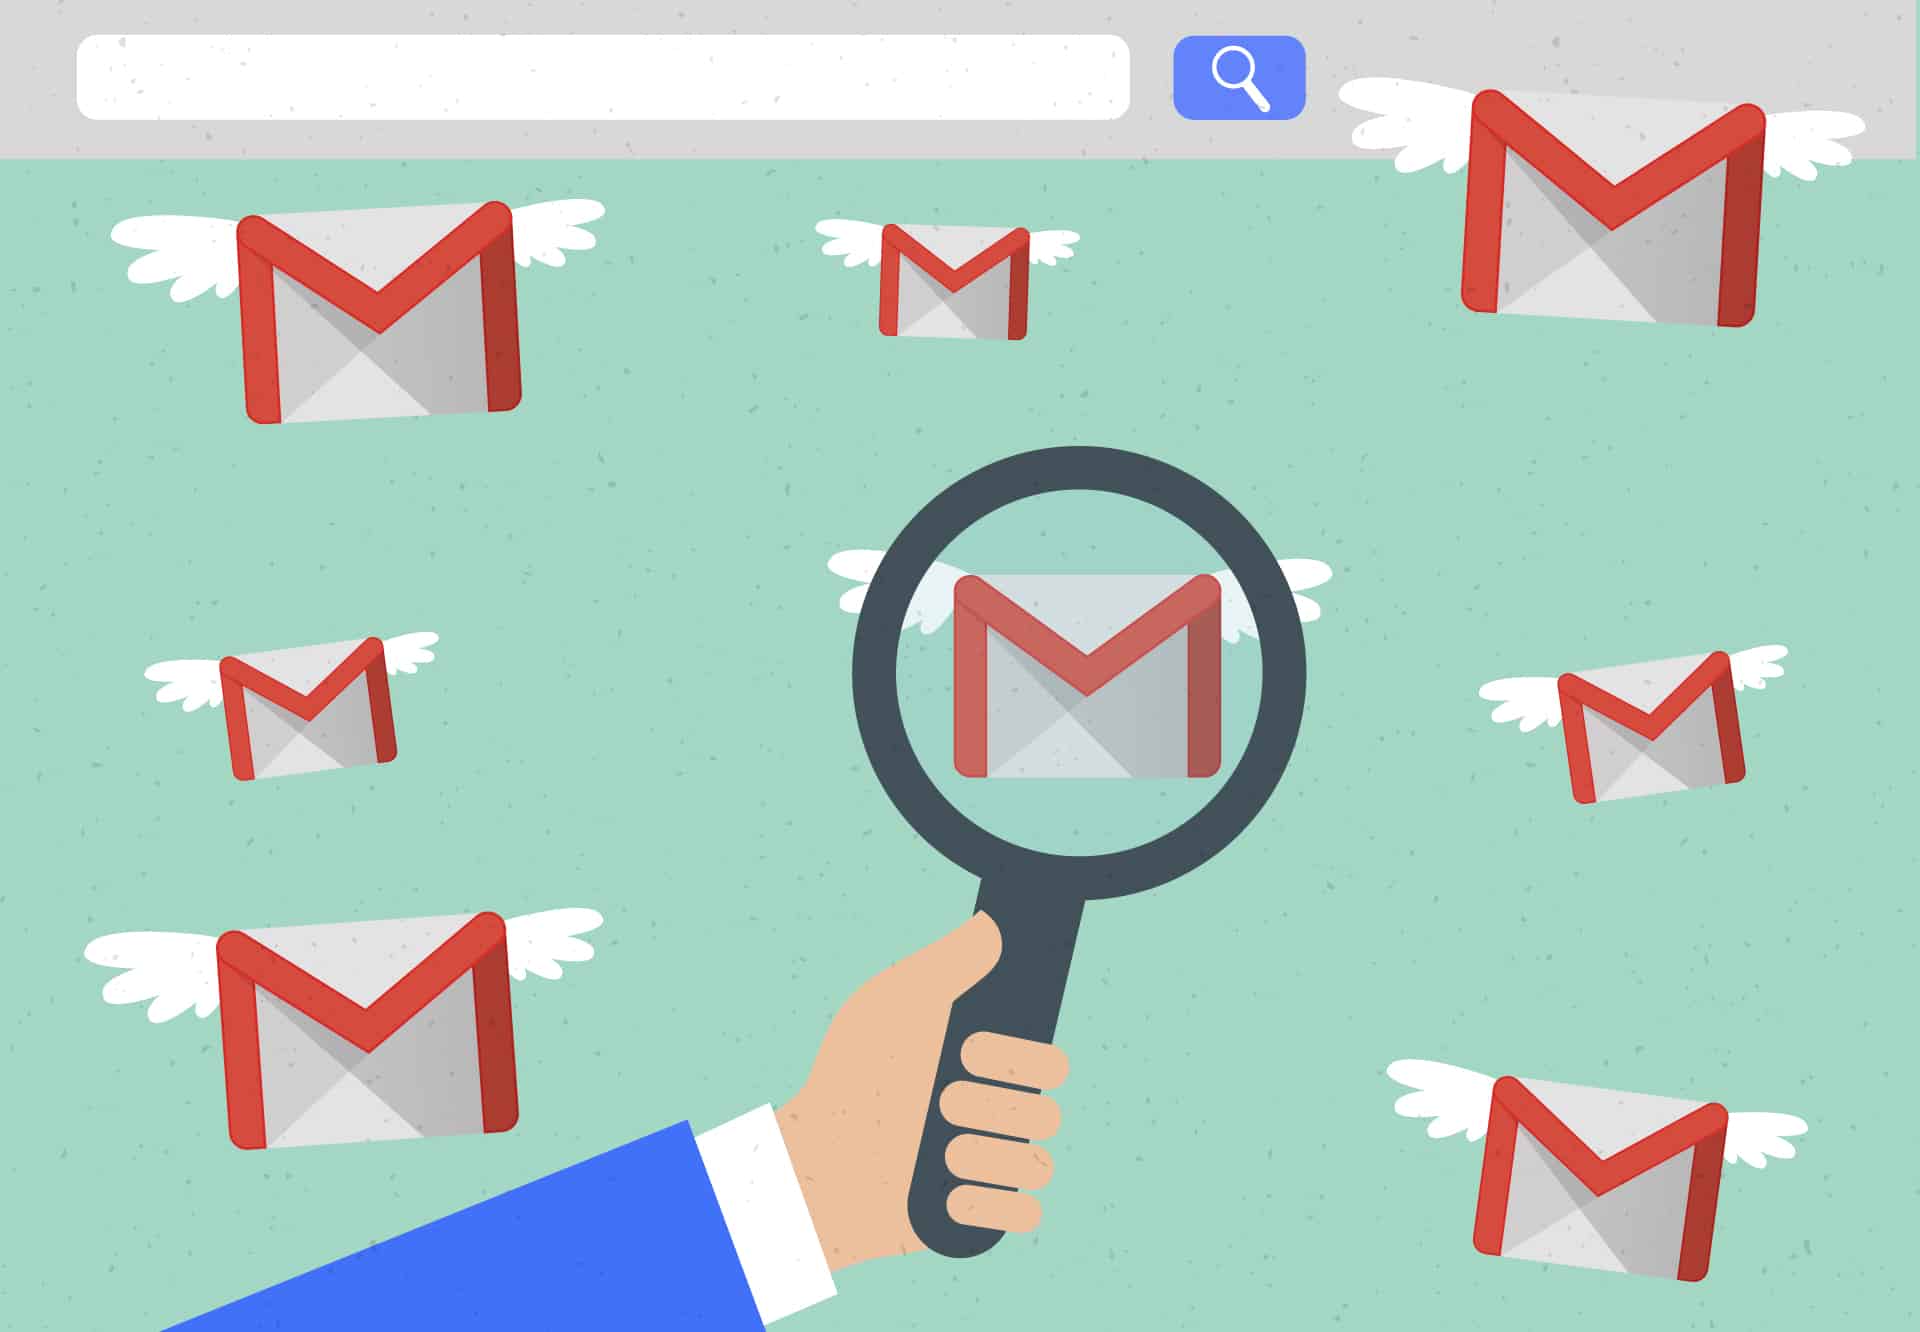 How To Find All Unread Messages In Gmail